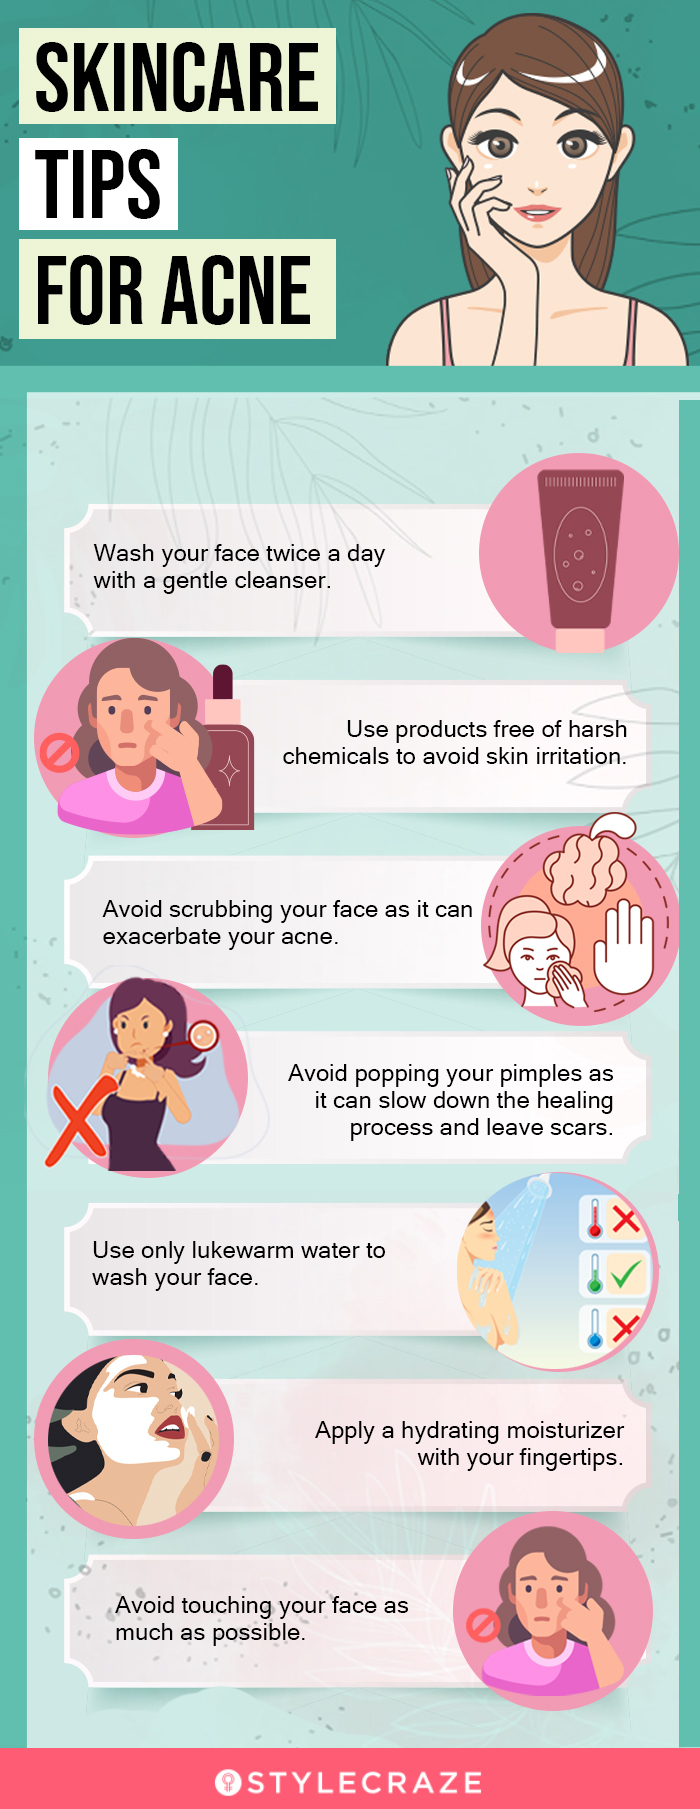 skincare tips for acne (infographic)